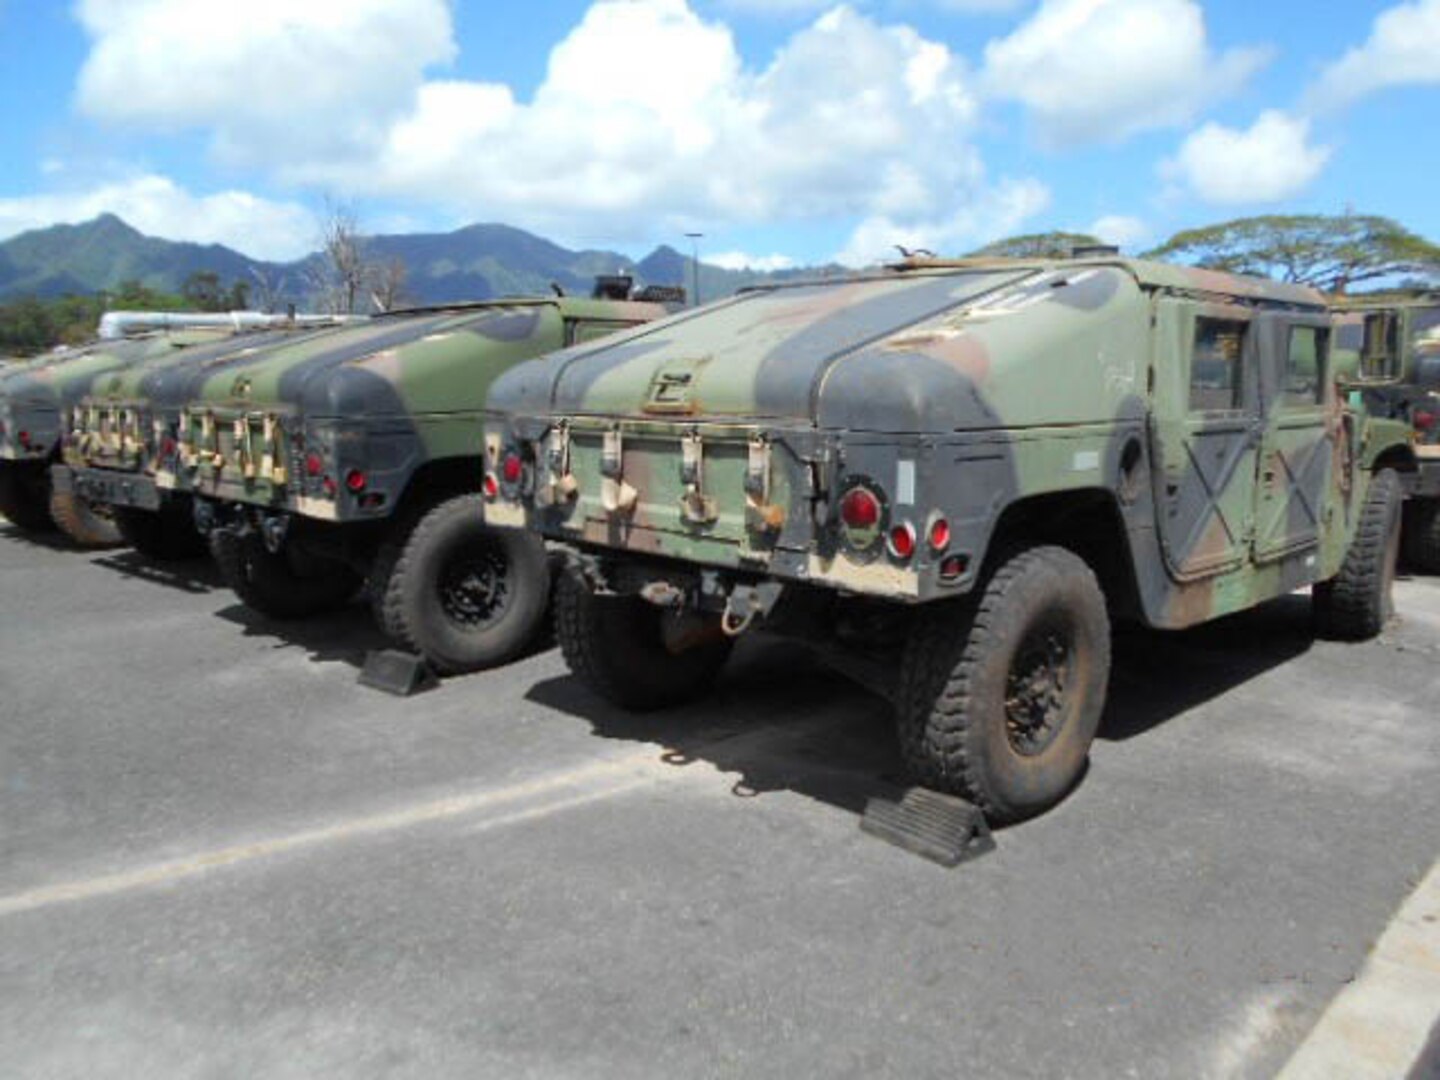 Vehicles from the Army’s 25th Infantry Division are arriving at DLA Disposition Services site at Pearl Harbor, Hawaii, to begin the disposal process.